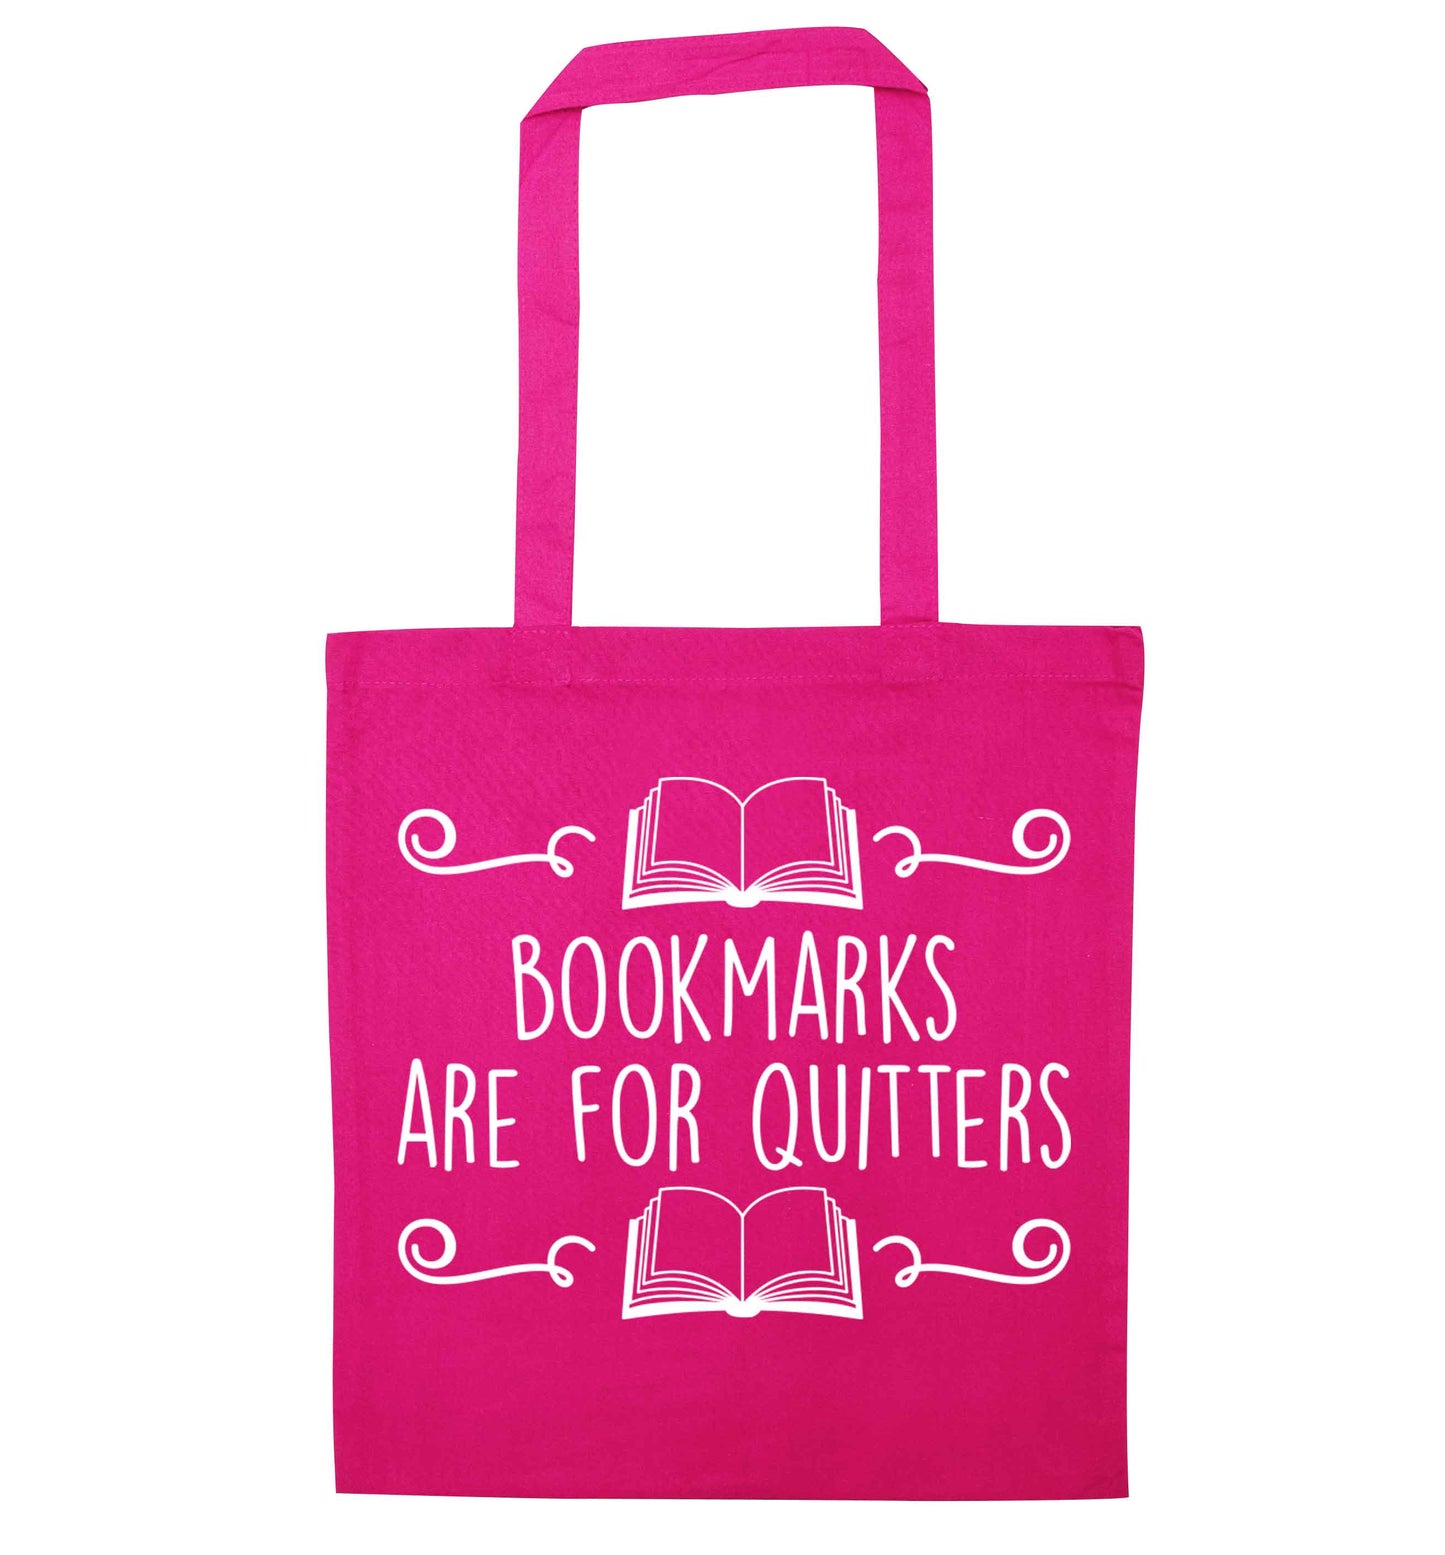 Bookmarks are for quitters pink tote bag